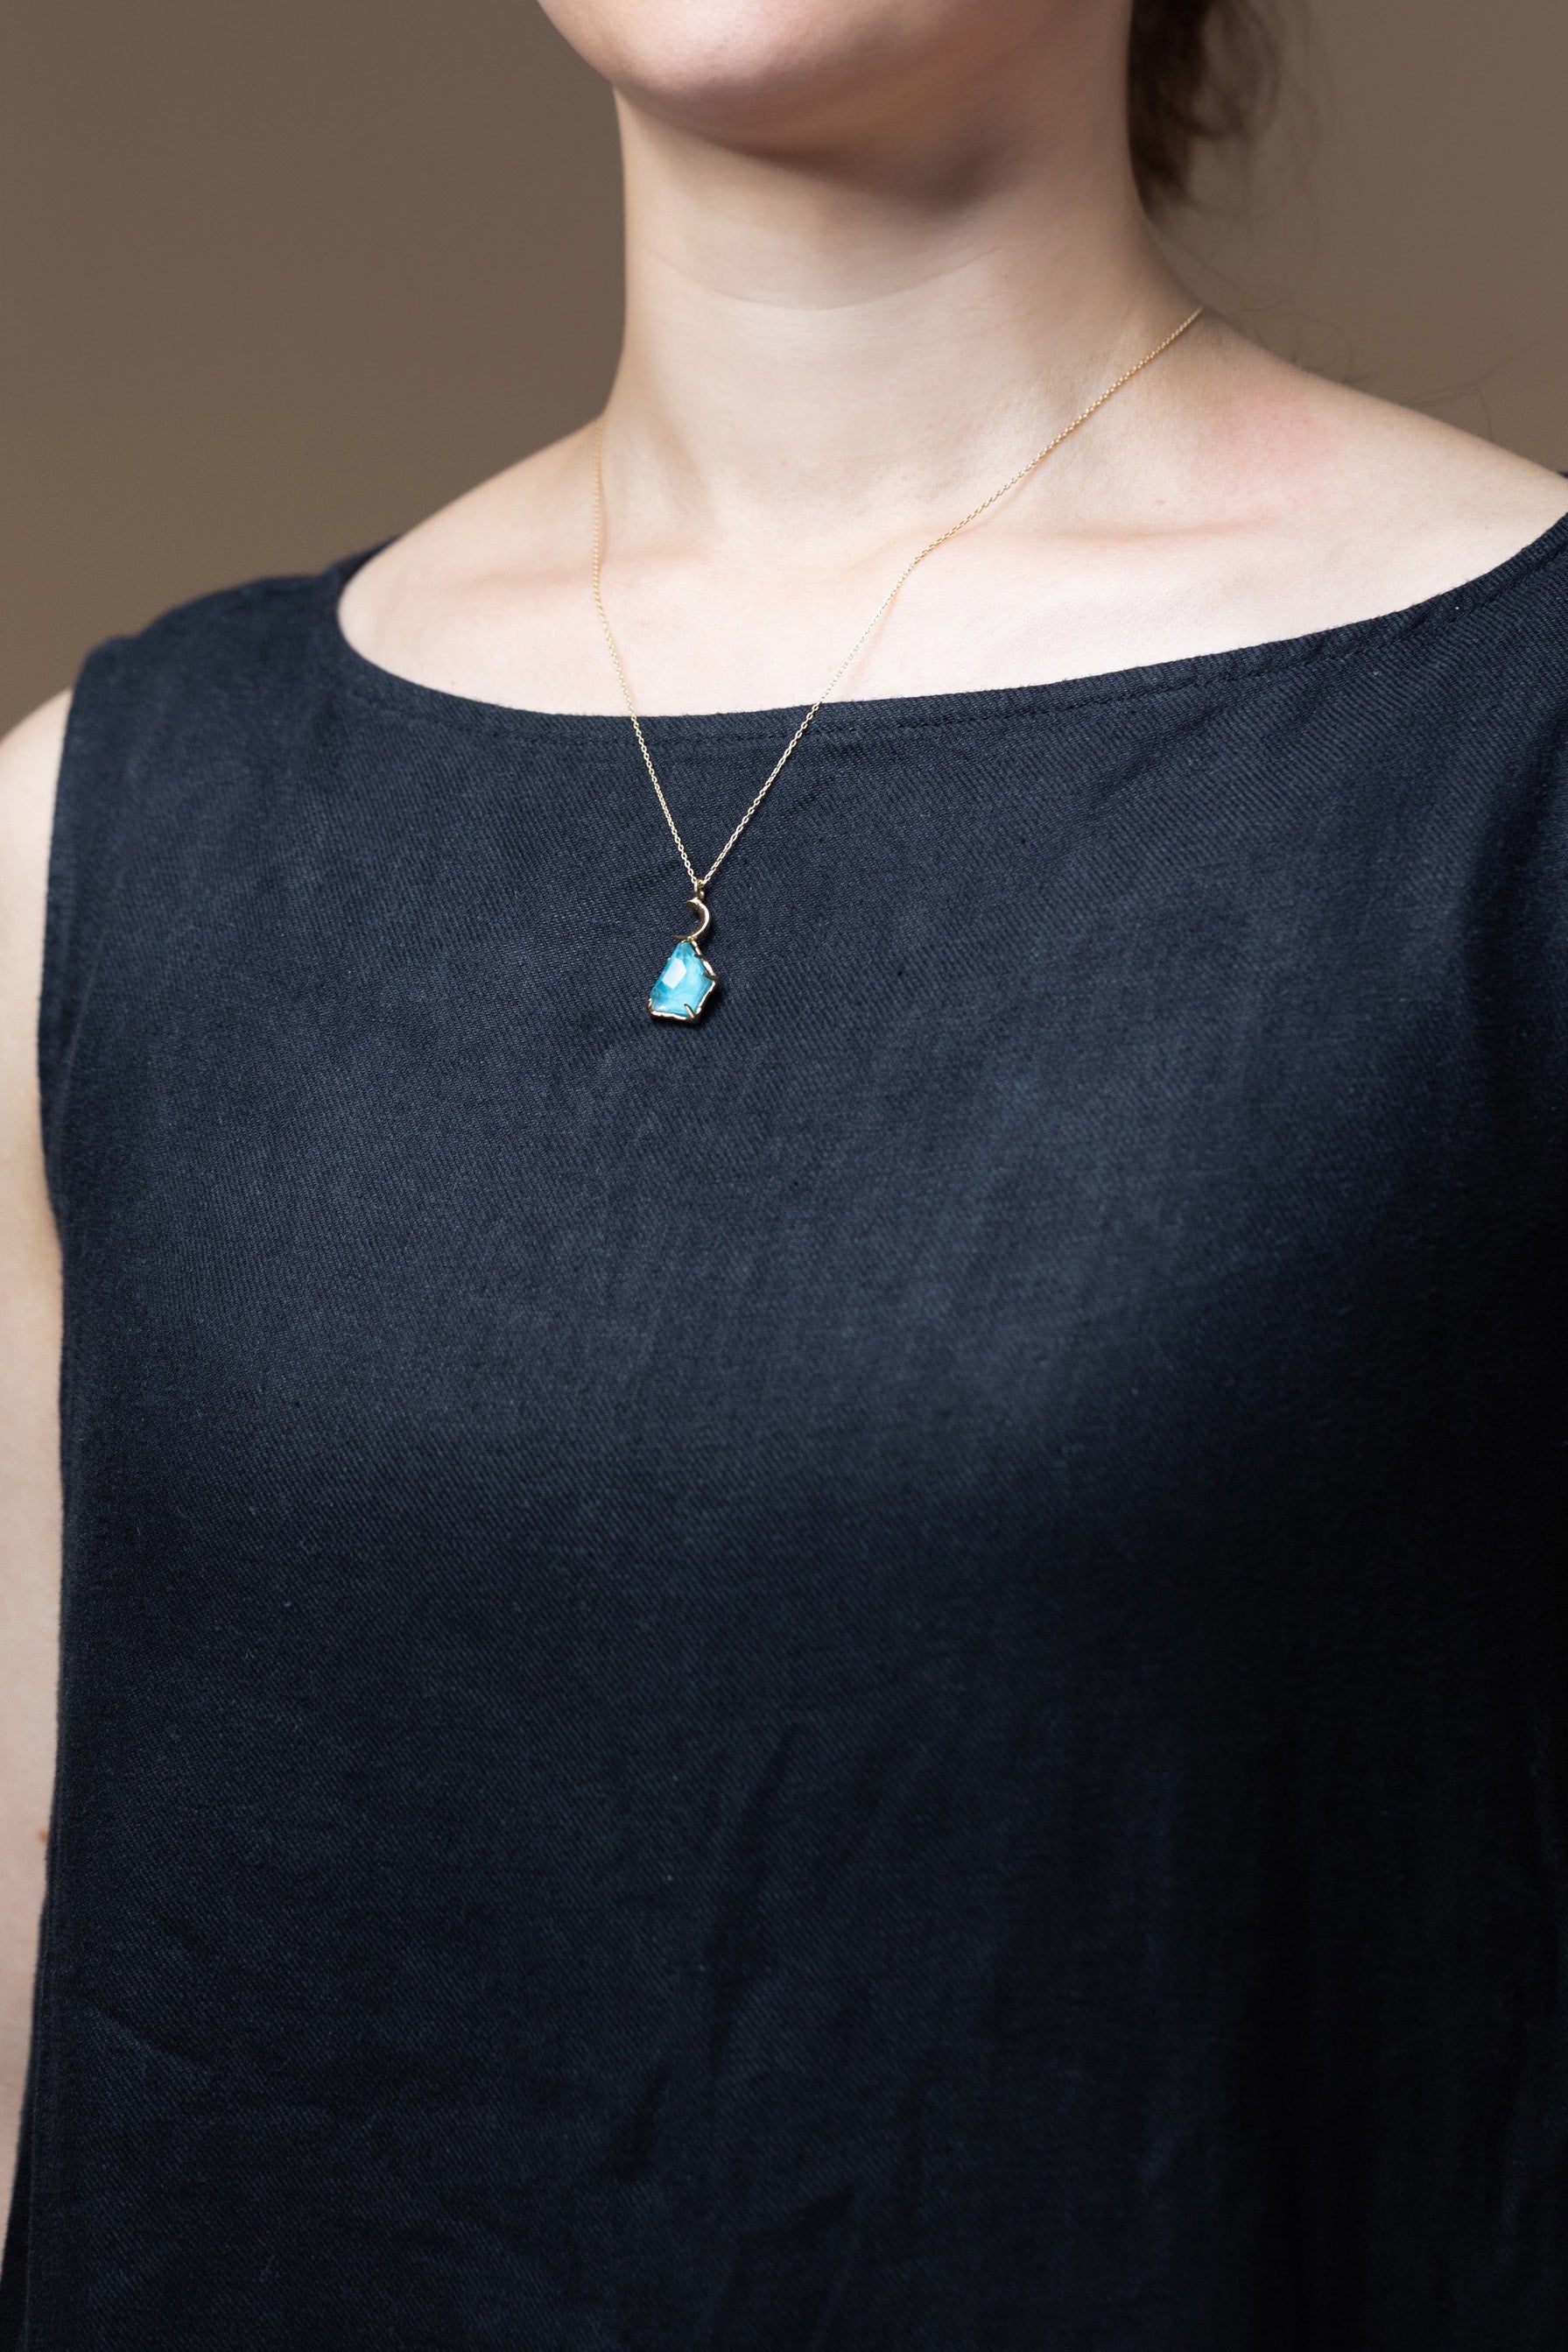 A Moon Shines Above An Ocean Blue Doublet Necklace (Turquoise and Rutilated Quartz on 18k)